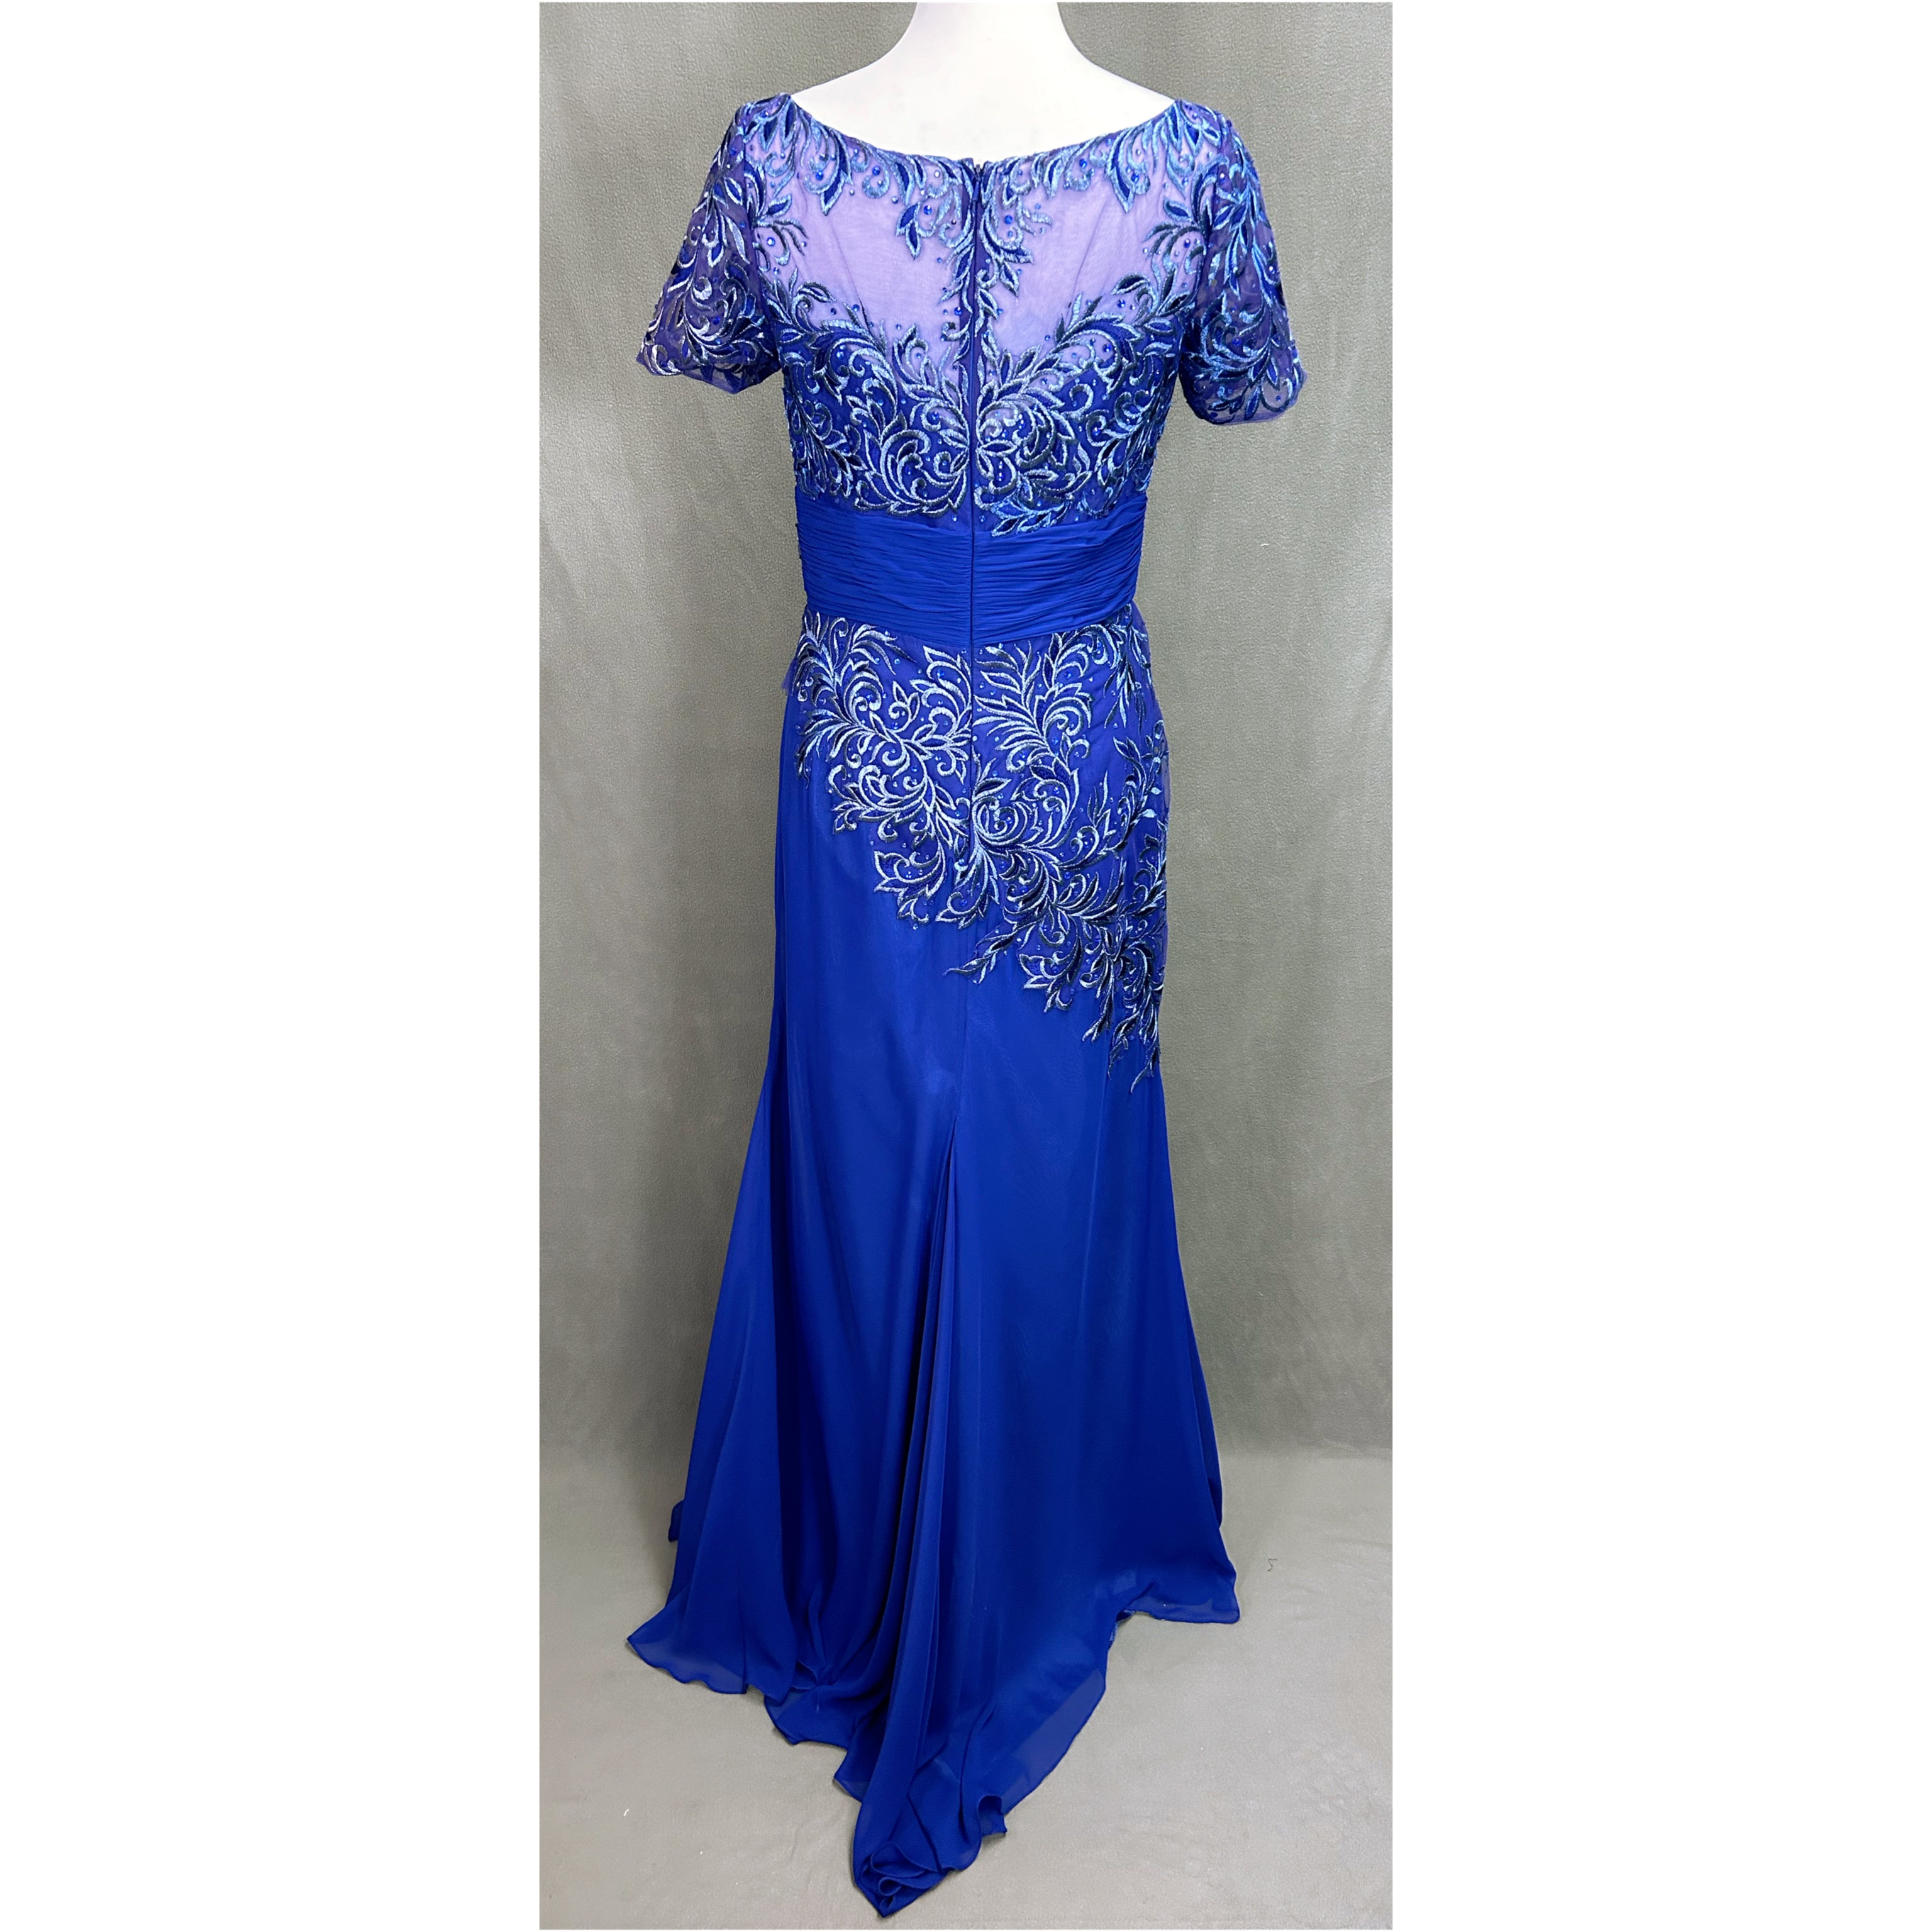 Cameron Blake royal blue dress, size 8, NEW WITH TAGS!